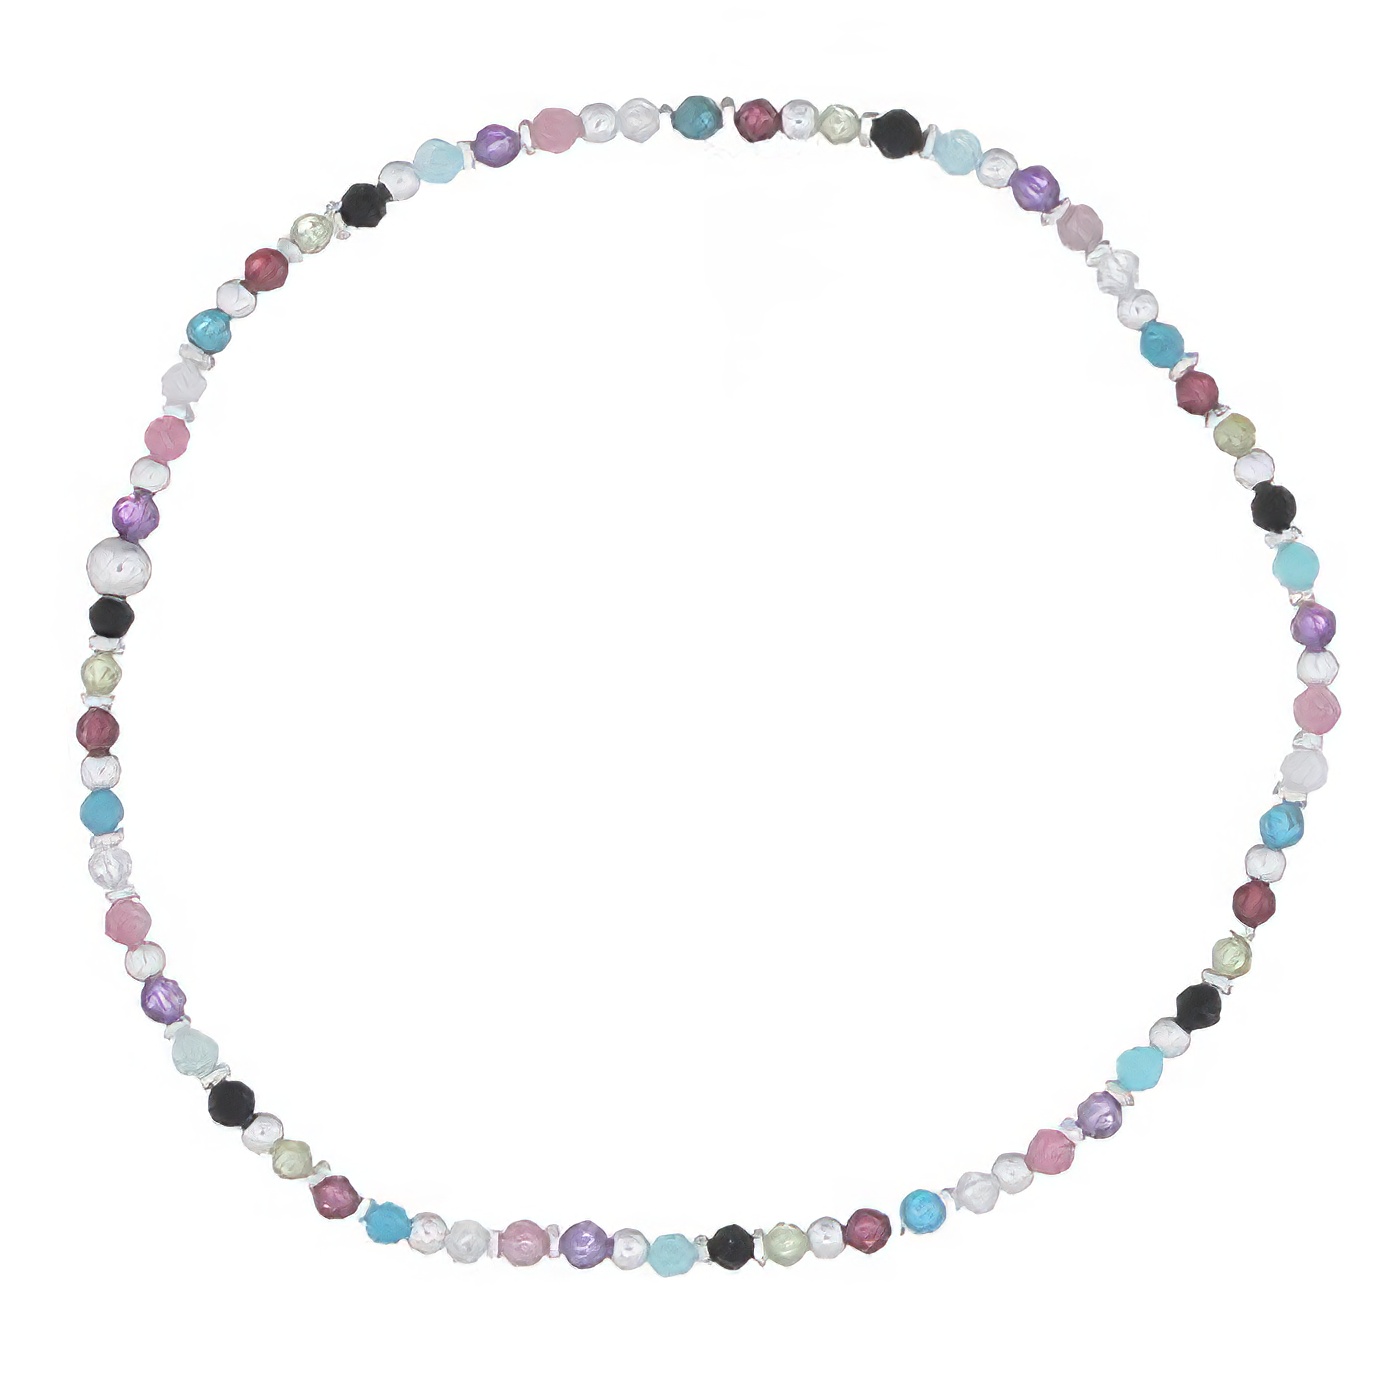 Precious Faceted Mix Stones With 925 Silver Stretchable Bracelet by BeYindi 